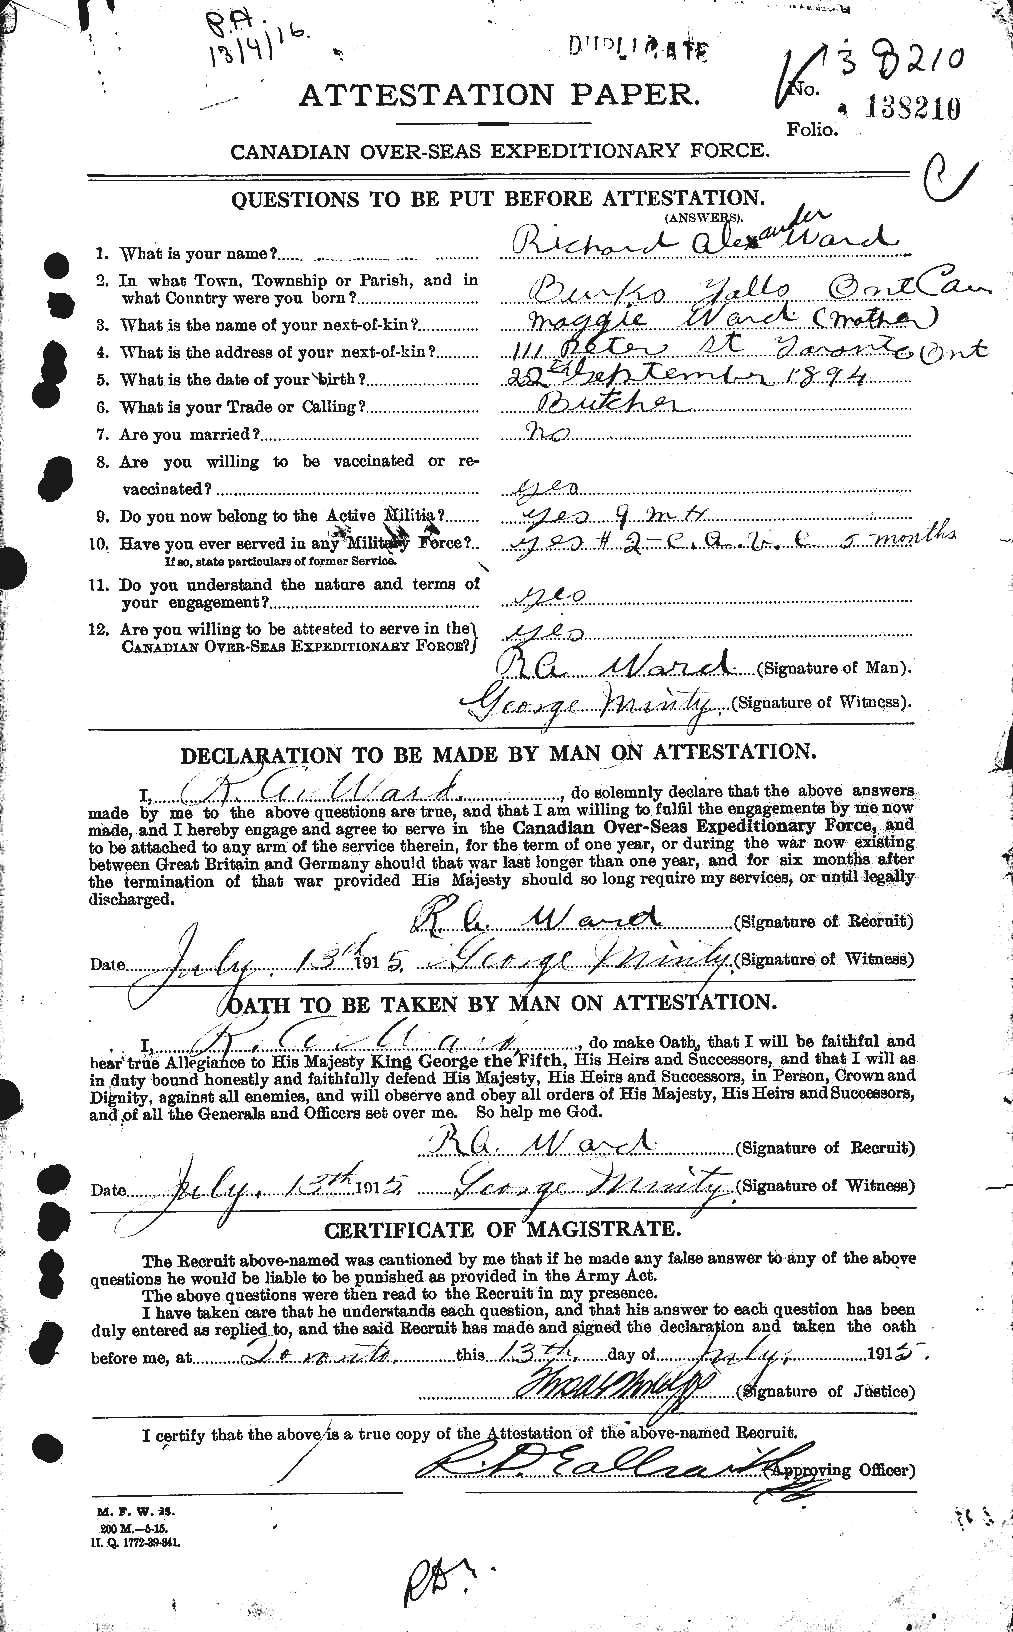 Personnel Records of the First World War - CEF 659650a